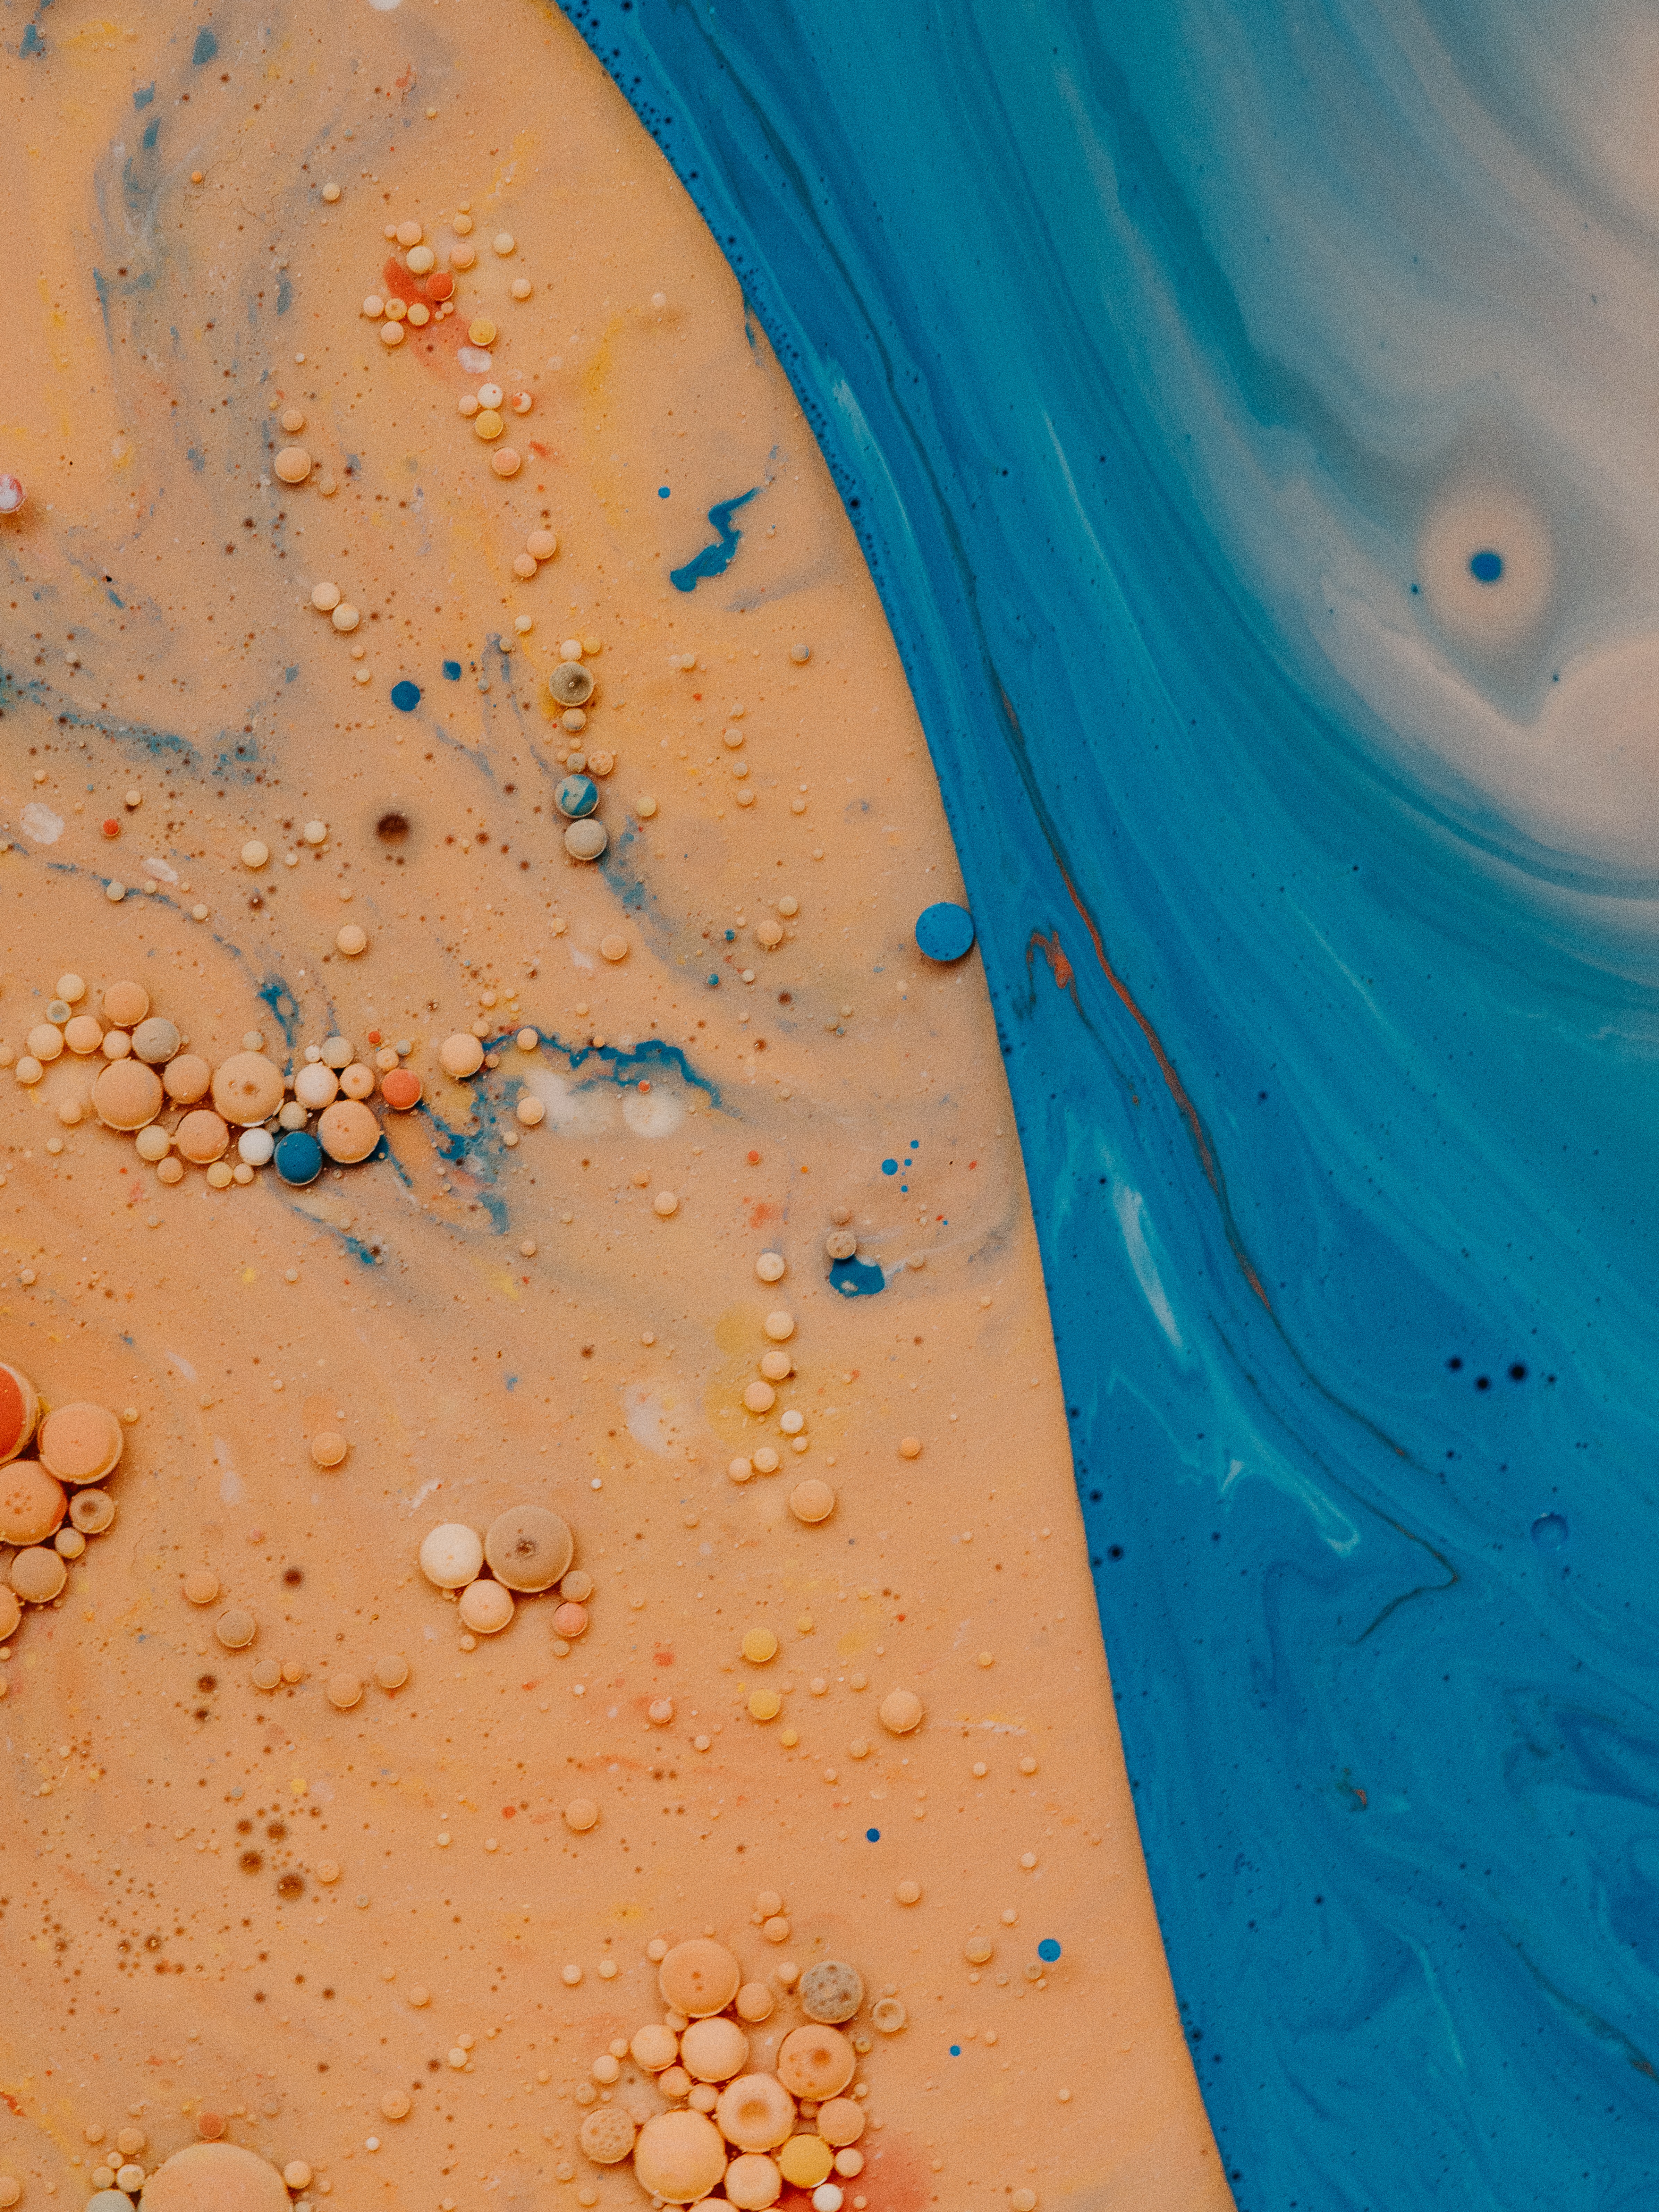 112557 download wallpaper liquid, abstract, bubbles, yellow, blue, macro, paint screensavers and pictures for free